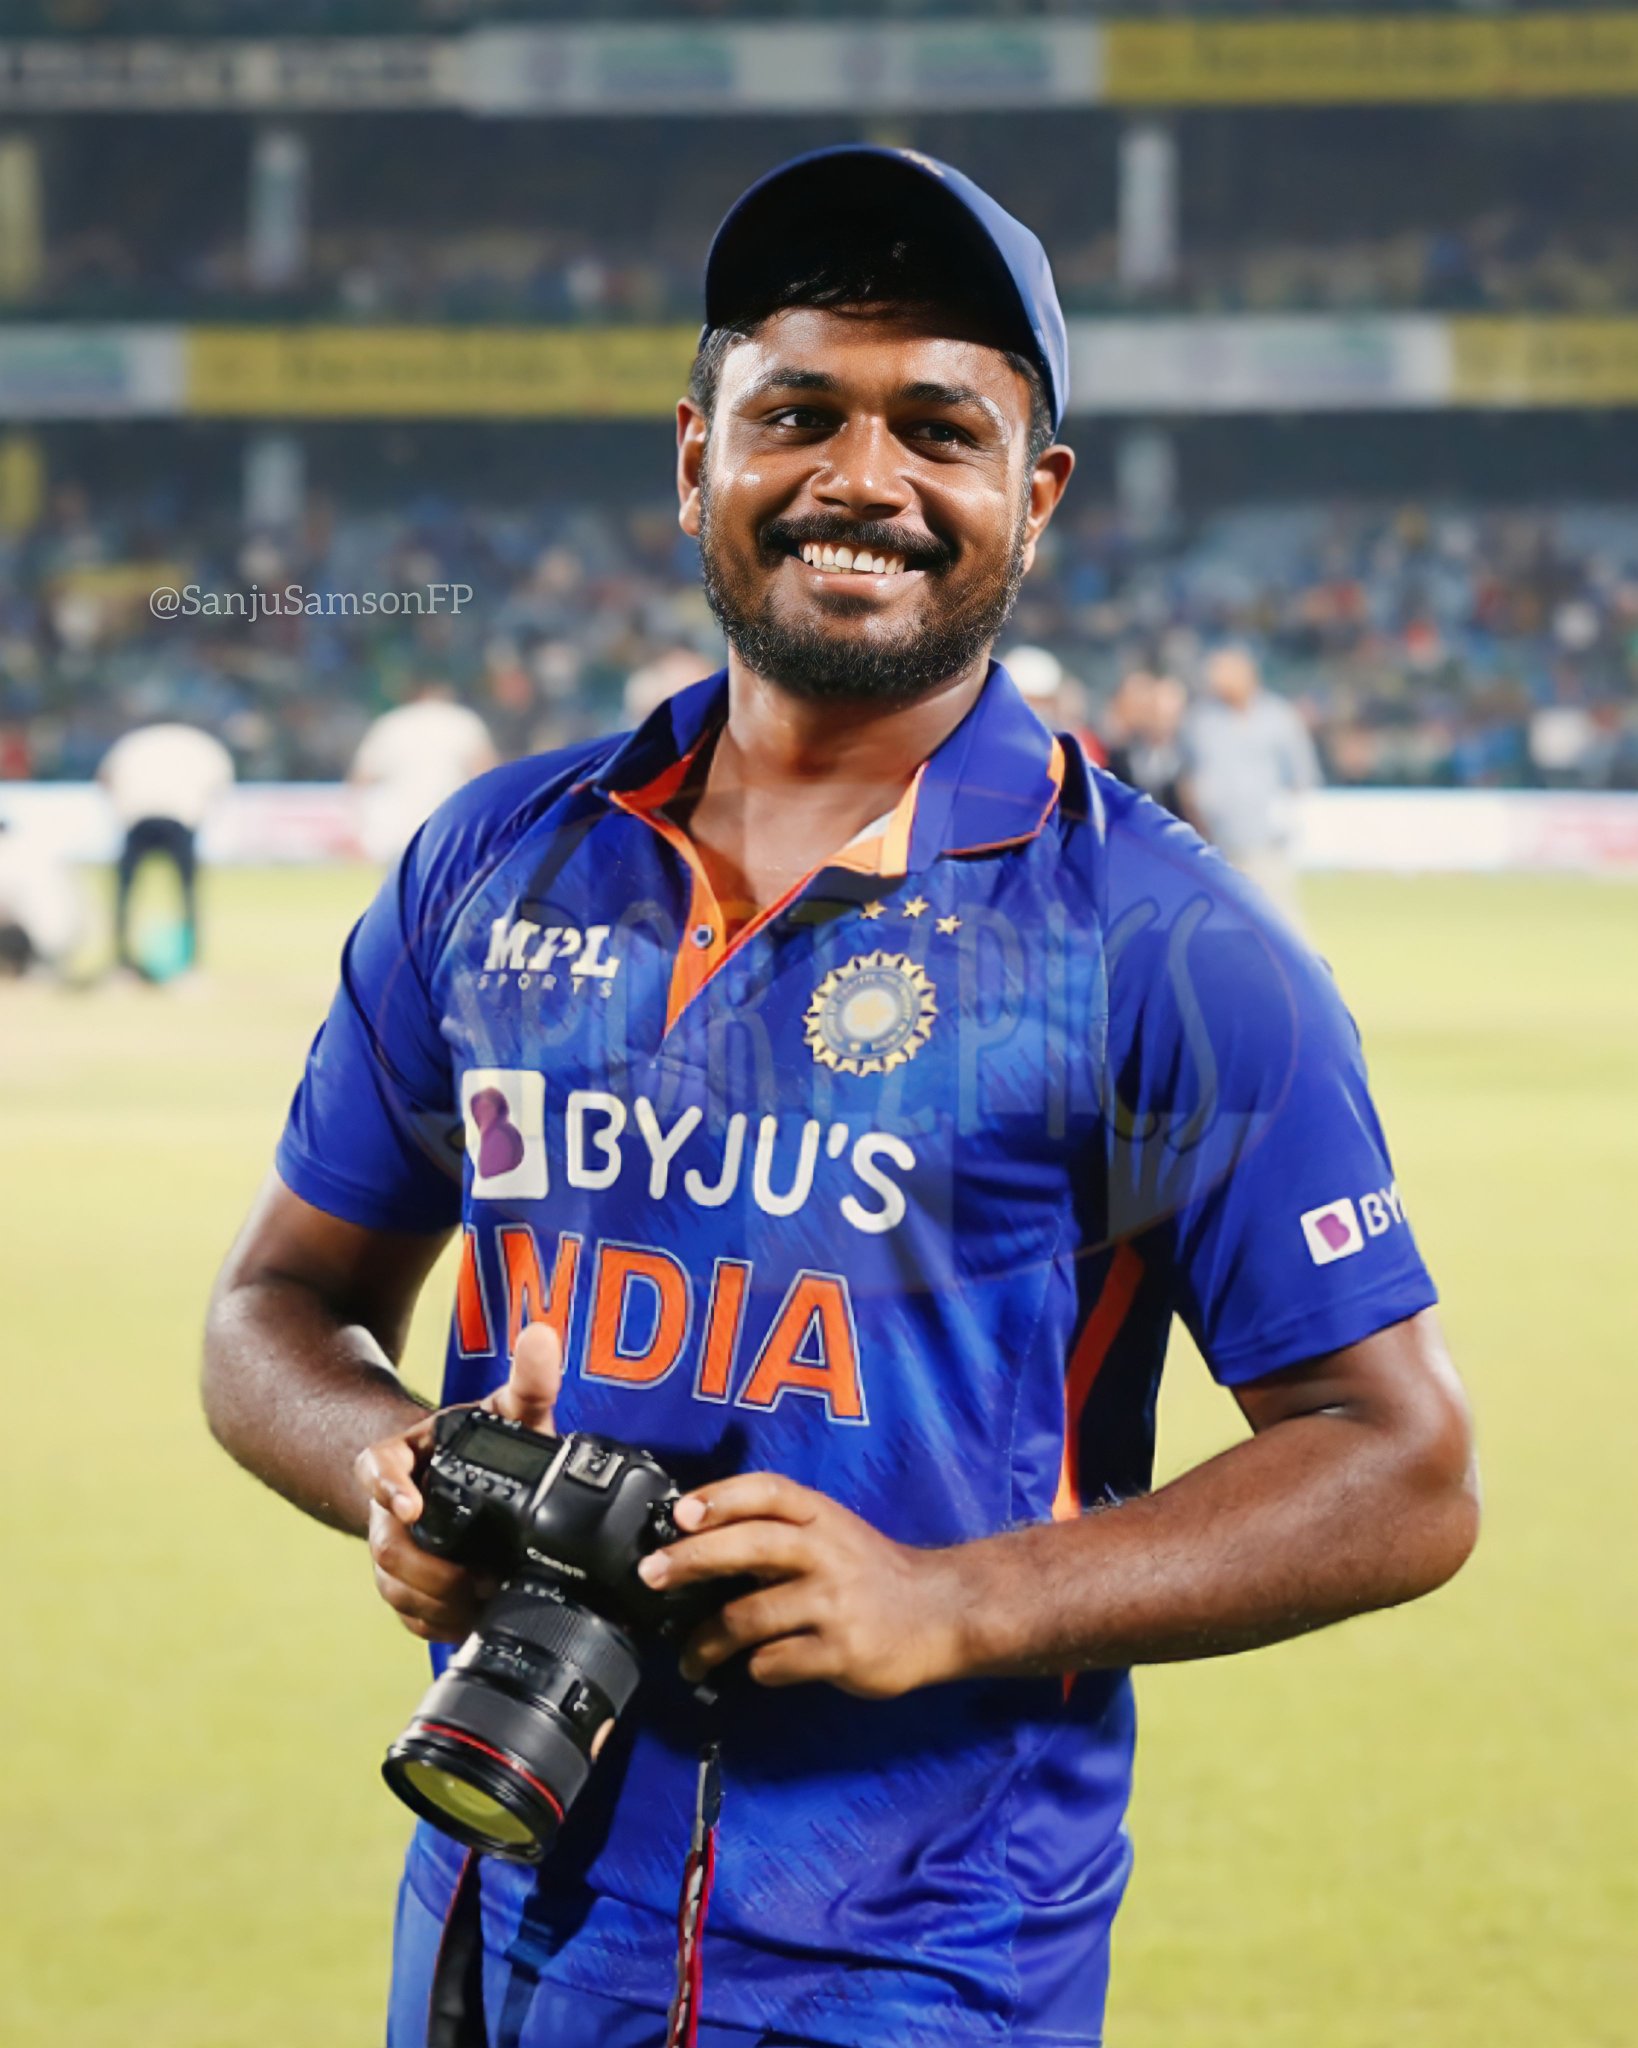 Sanju Samson Fans Page on Twitter: "That's how things work for Sanju Samson  since 2014, the most unfairly treated player ever in Indian cricket history  #SanjuSamson https://t.co/SRCTR3PBsR" / Twitter